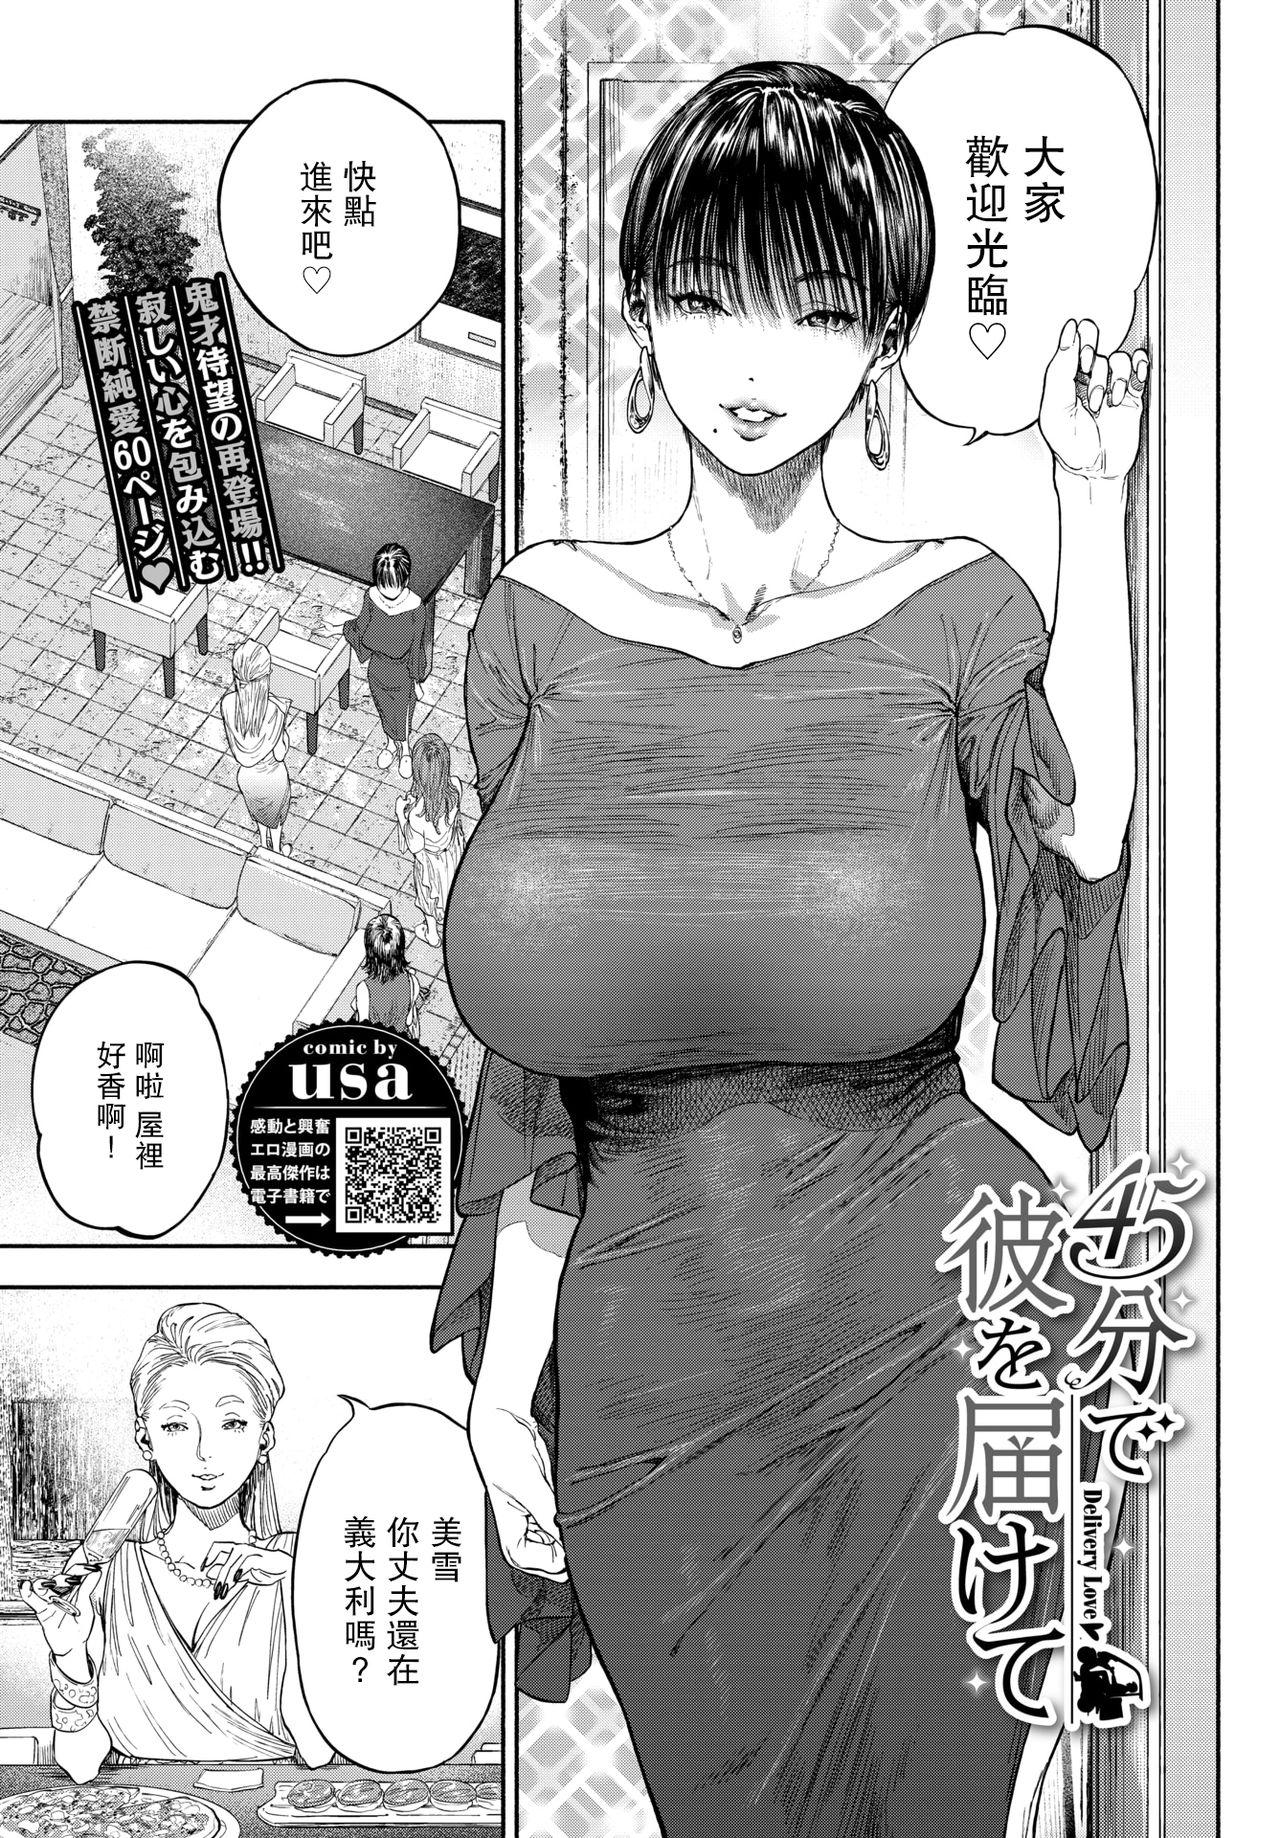 Mature Woman [usa] 45-fun de Kare o Todokete - Delivery Love (COMIC BAVEL 2020-12) [Chinese] [路过的骑士汉化组] [Digital] Teen Sex - Page 1